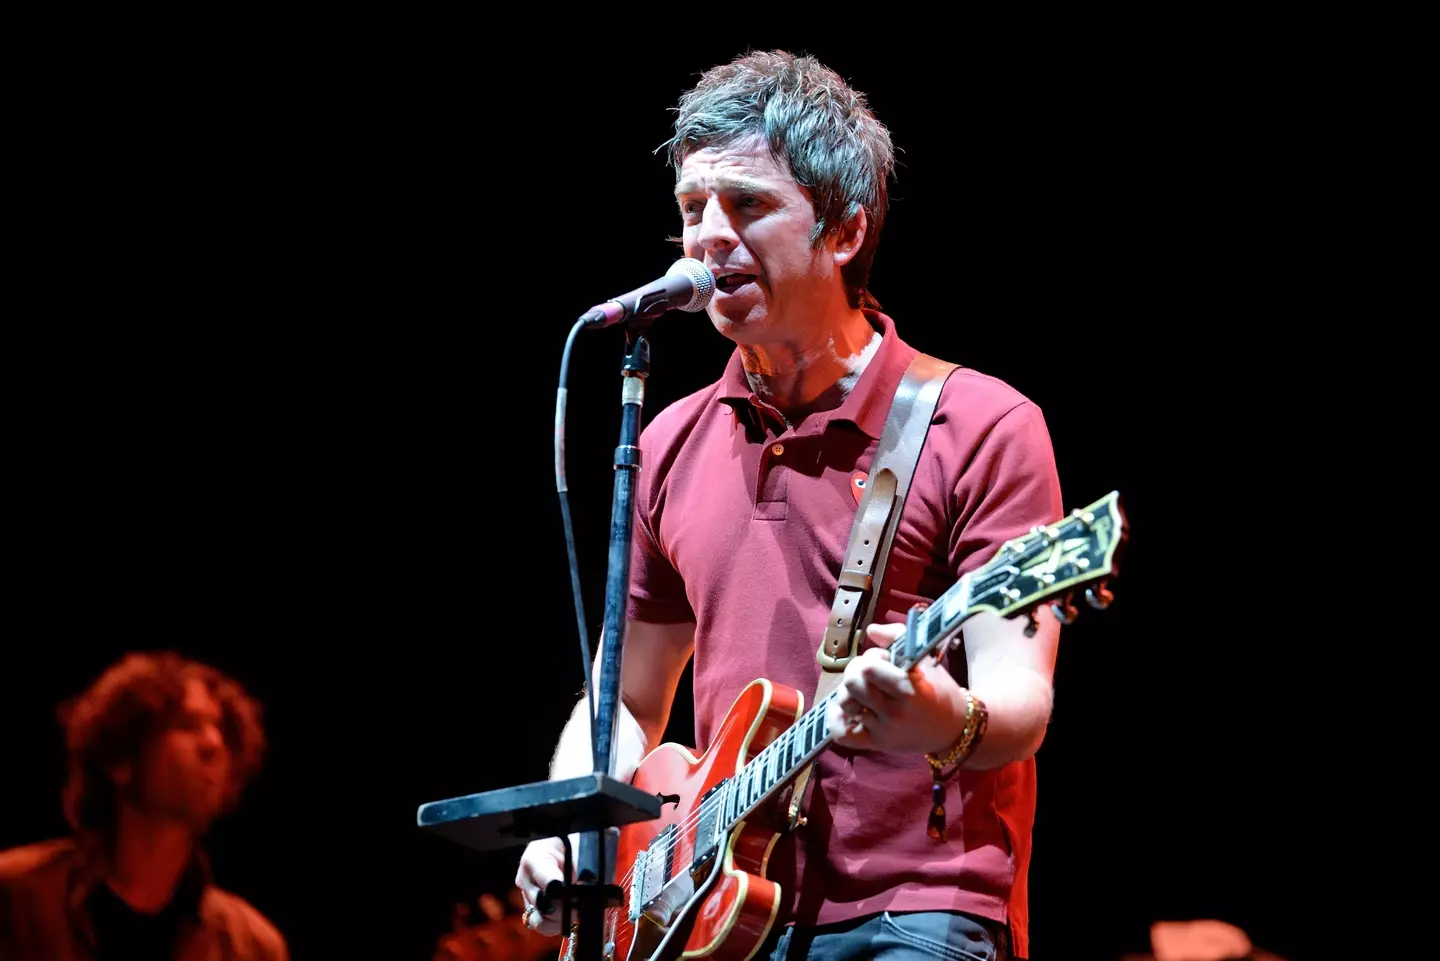 Noel Gallagher has revealed he’s banned from China.